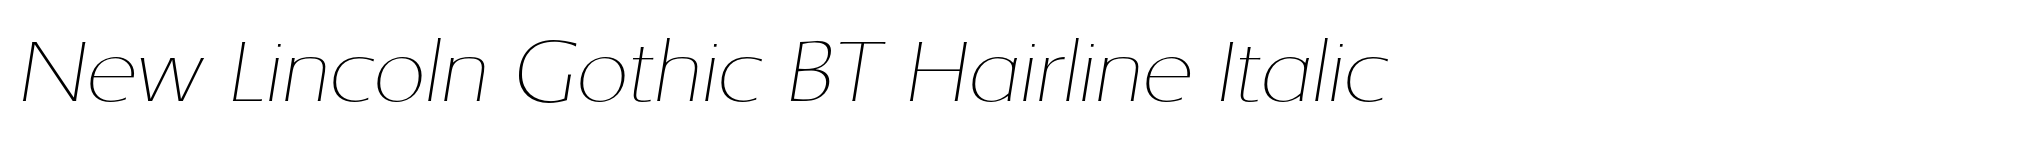 New Lincoln Gothic BT Hairline Italic image